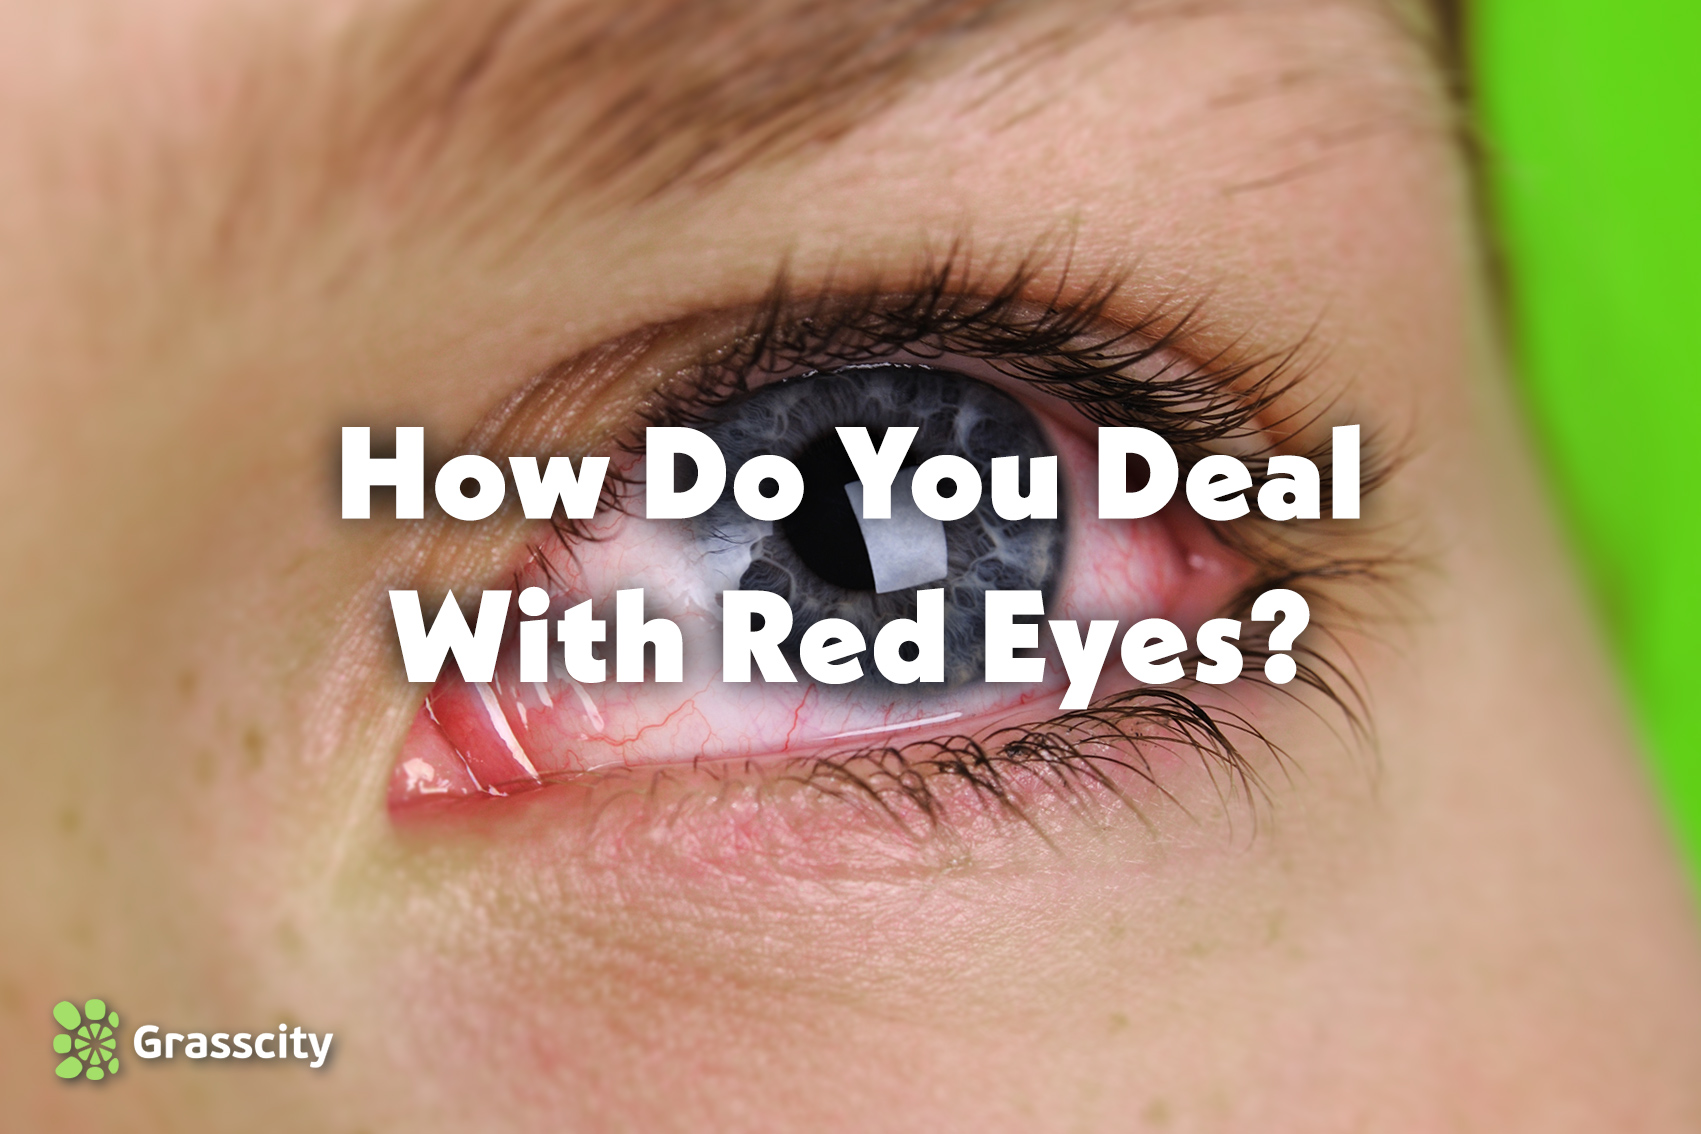 How Do You Deal With Red Eyes?